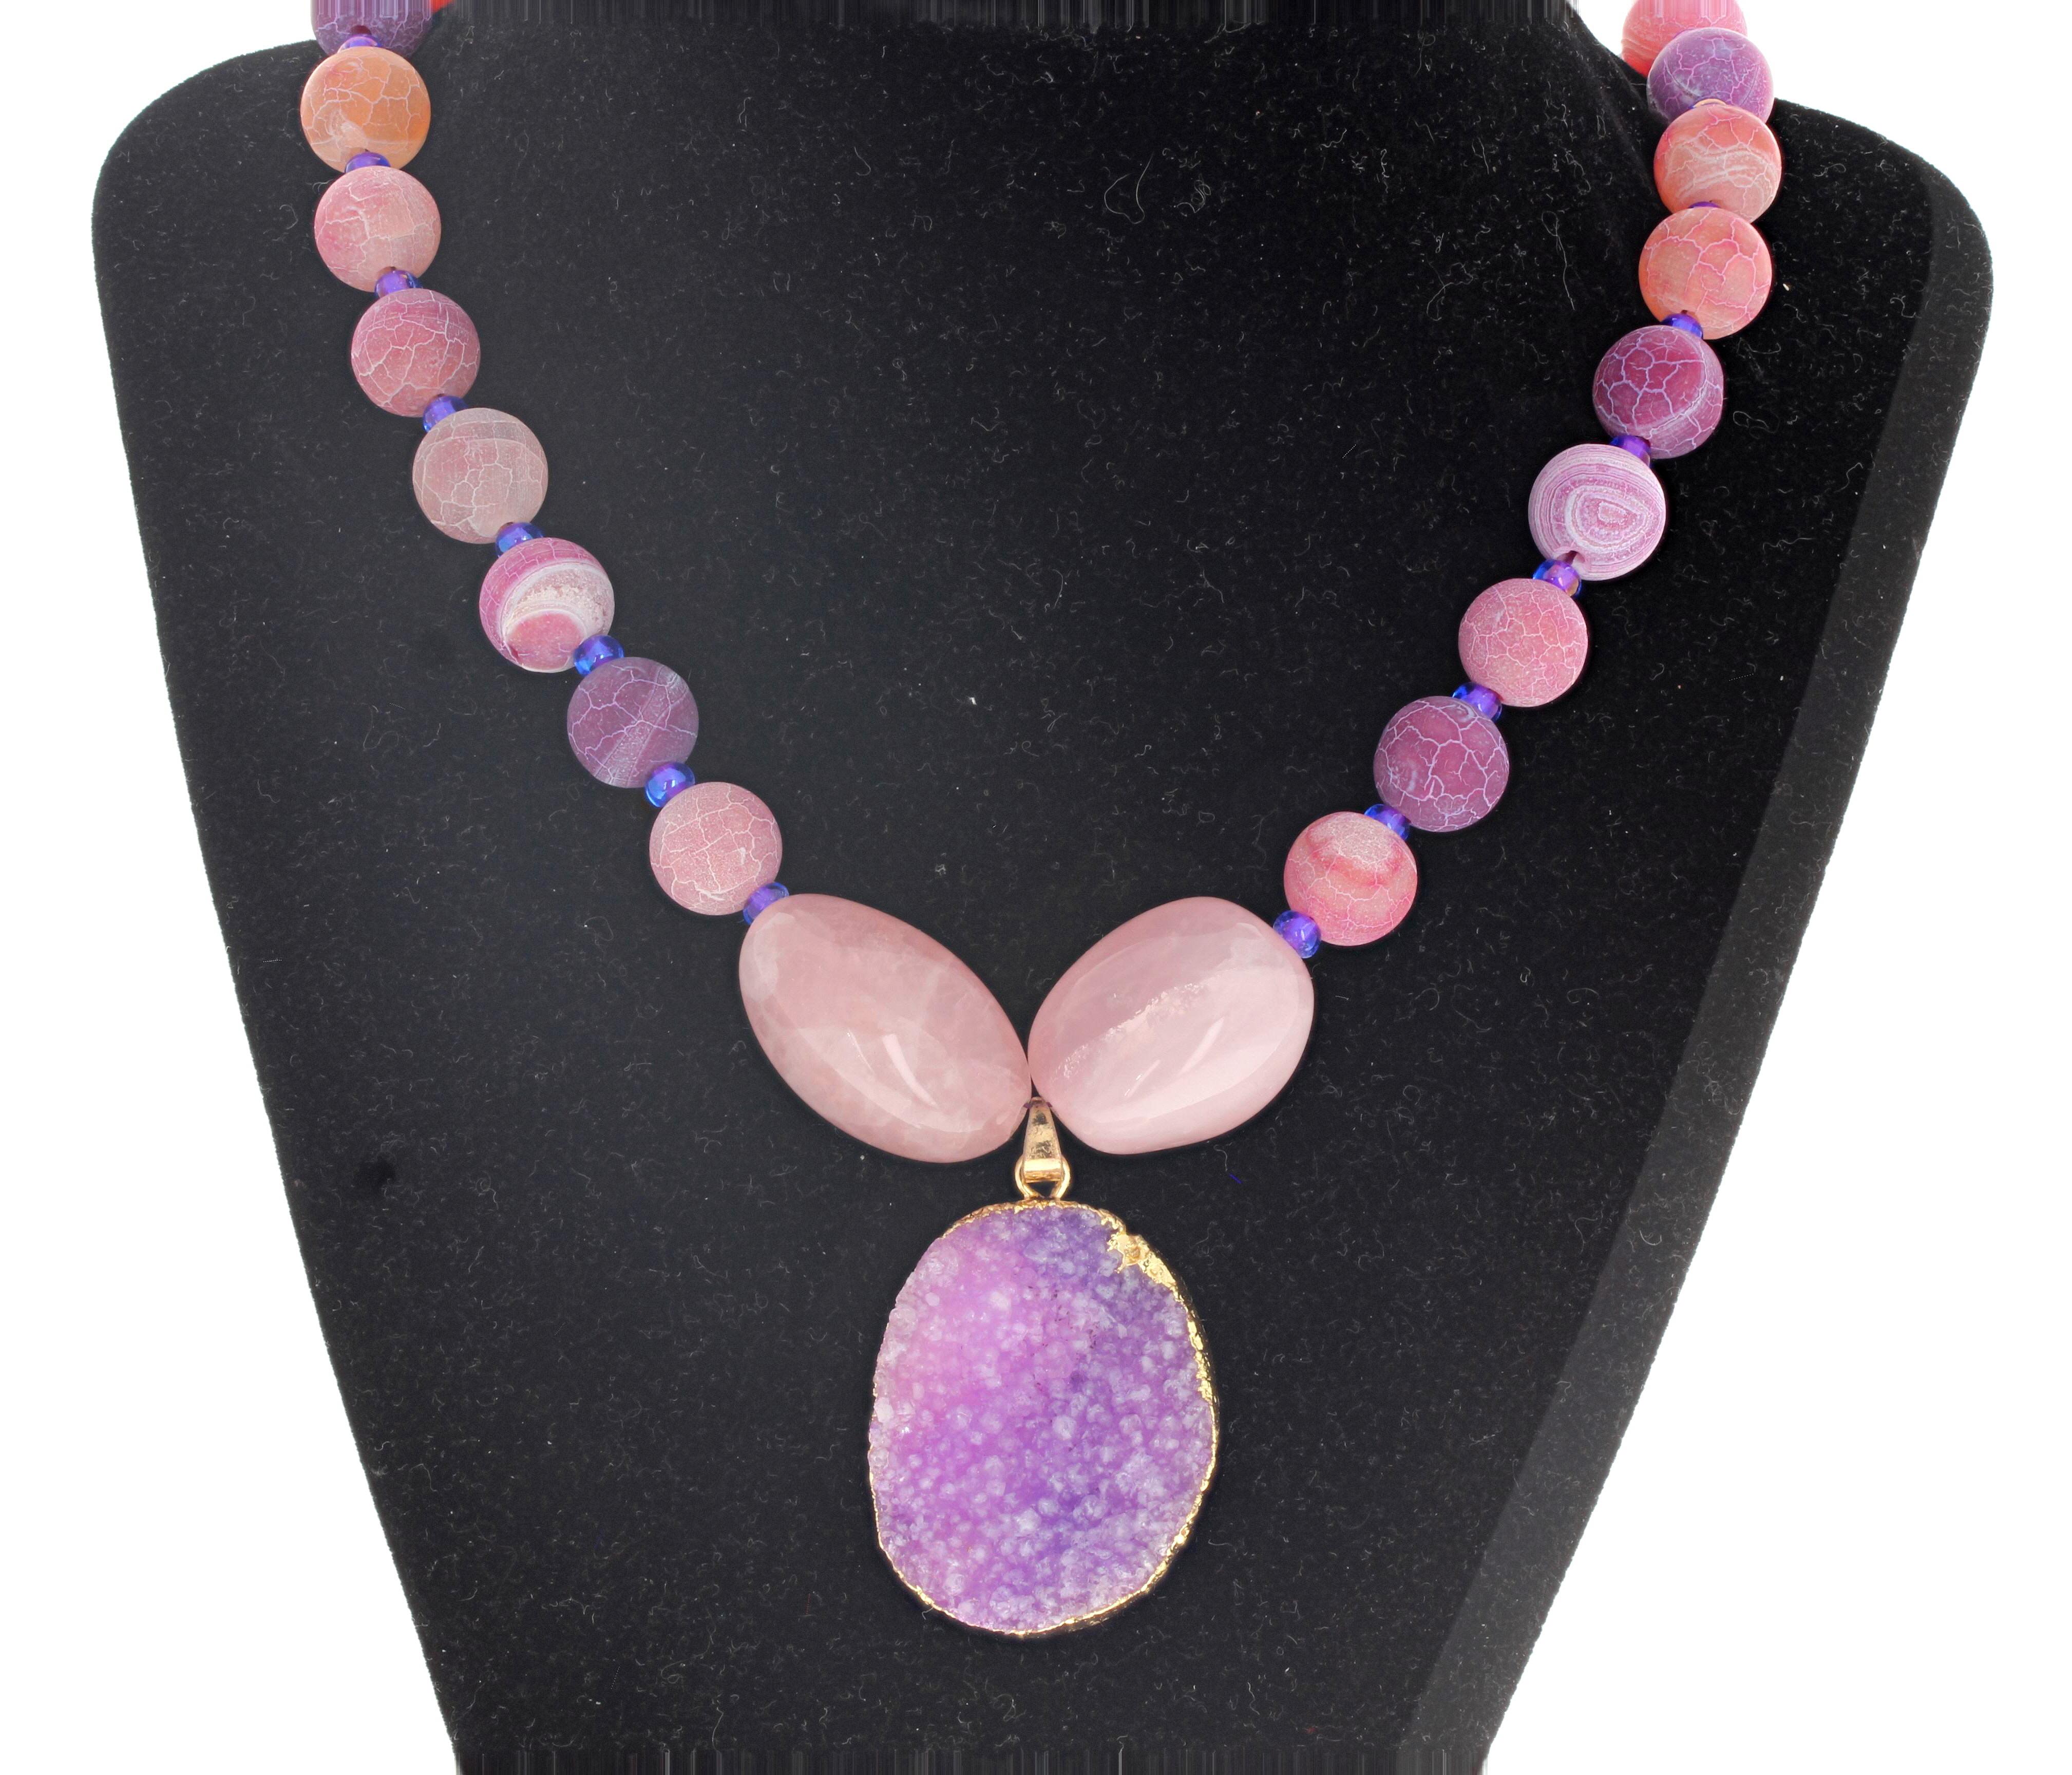 Beautiful highly polished round natural multi-colors Druzy Quartz with the two natural polished center Pink Quartz are enhanced by the large natural purplypink center dangling partially gold plated Druzy Quartz.  This necklace is 20 inches long. 